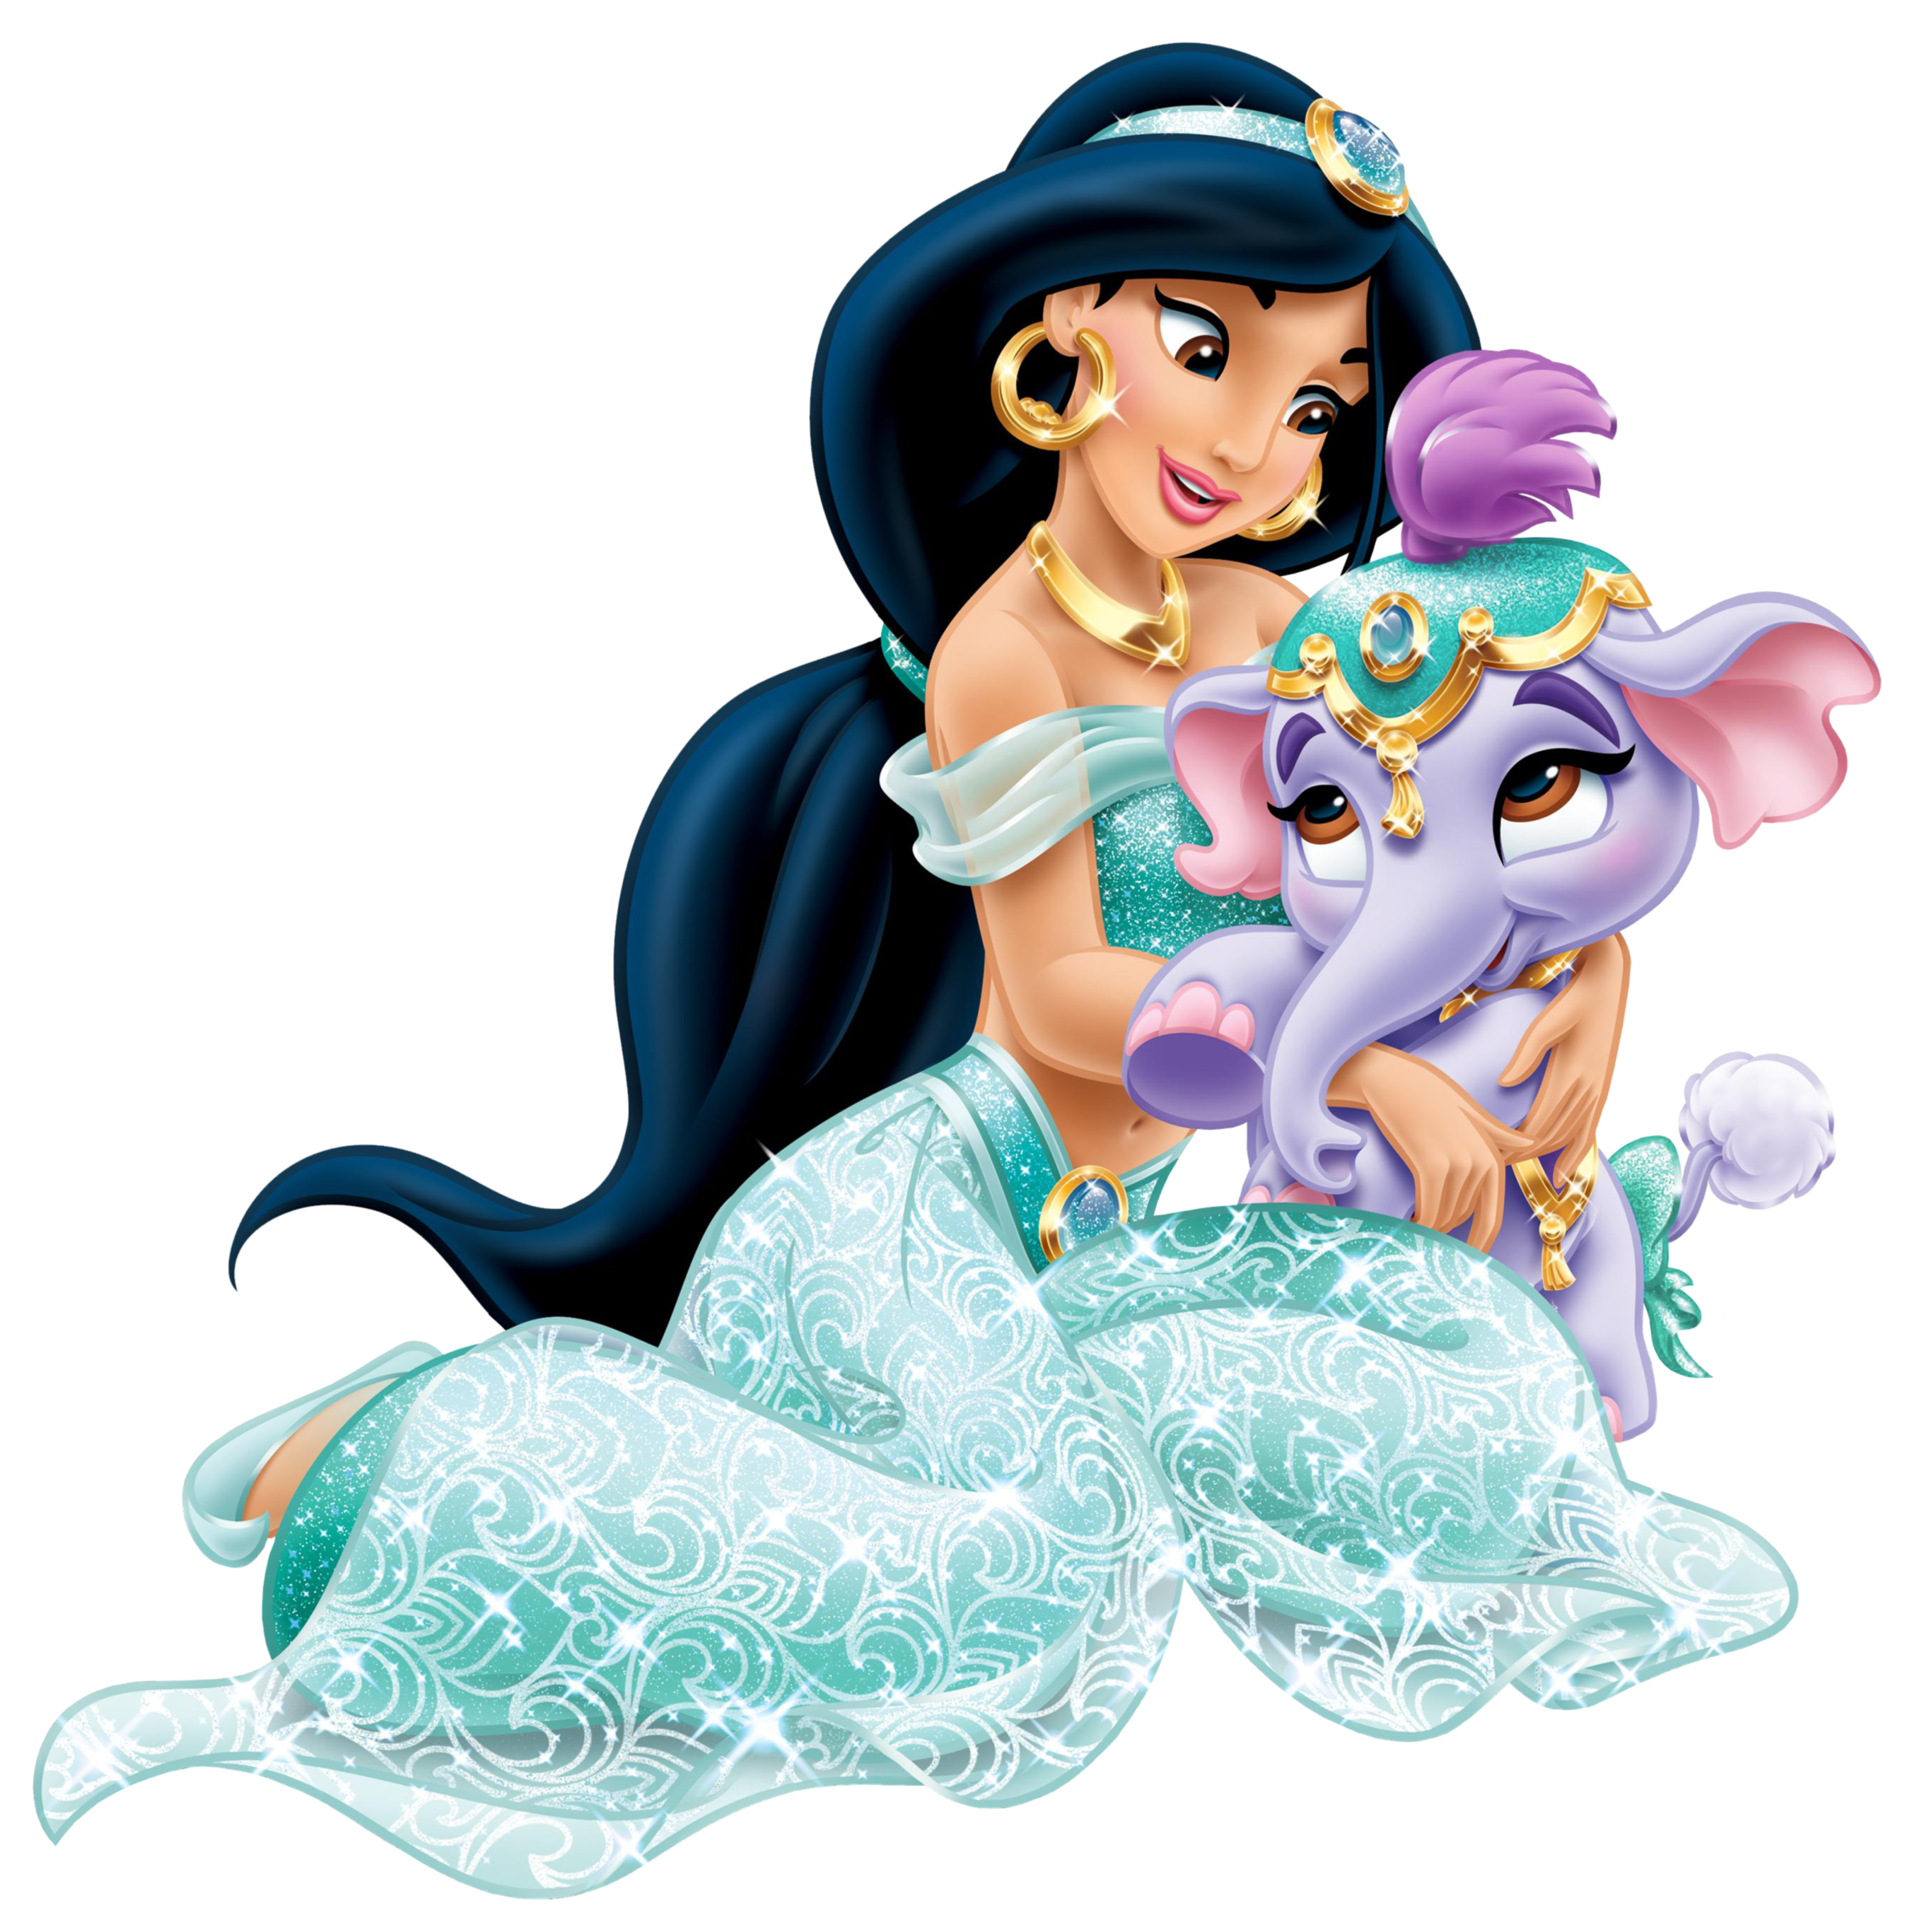 https://gallery.yopriceville.com/var/albums/Free-Clipart-Pictures/Cartoons-PNG/Disney_Princess_Jasmine_with_Cute_Elephant_Transparent_PNG_Clip_Art_Image.png?m=1449806102